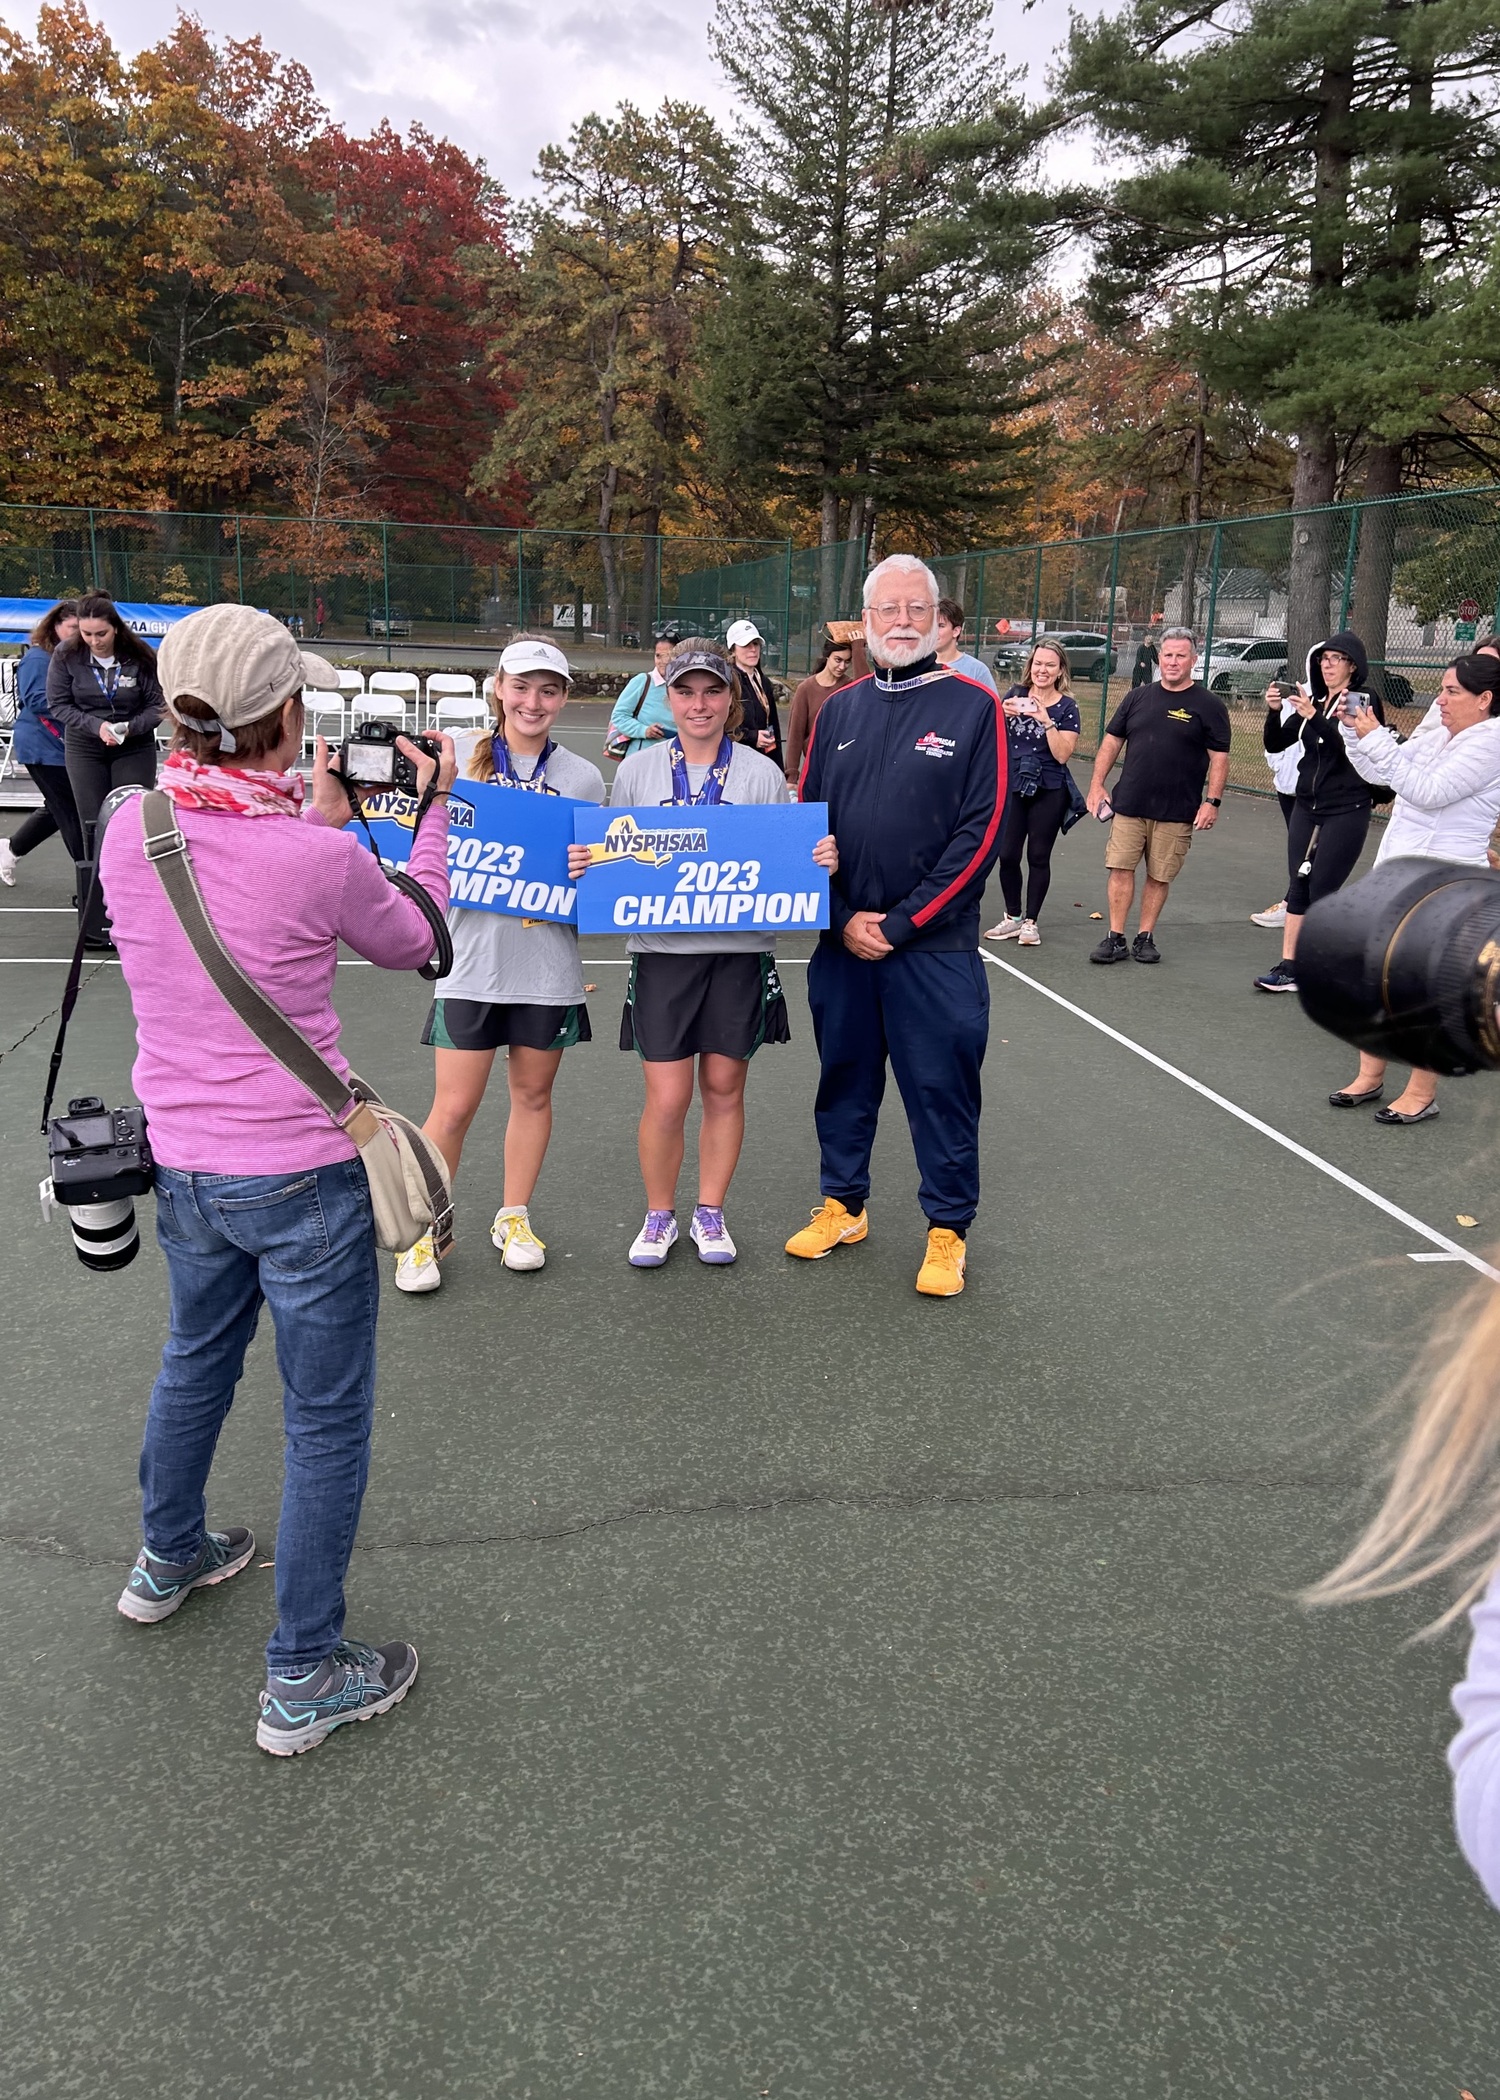 Westhampton Beach's doubles team of junior Matilda Buchen and senior Julia Stabile are swarmed by photographers after their state final victory.